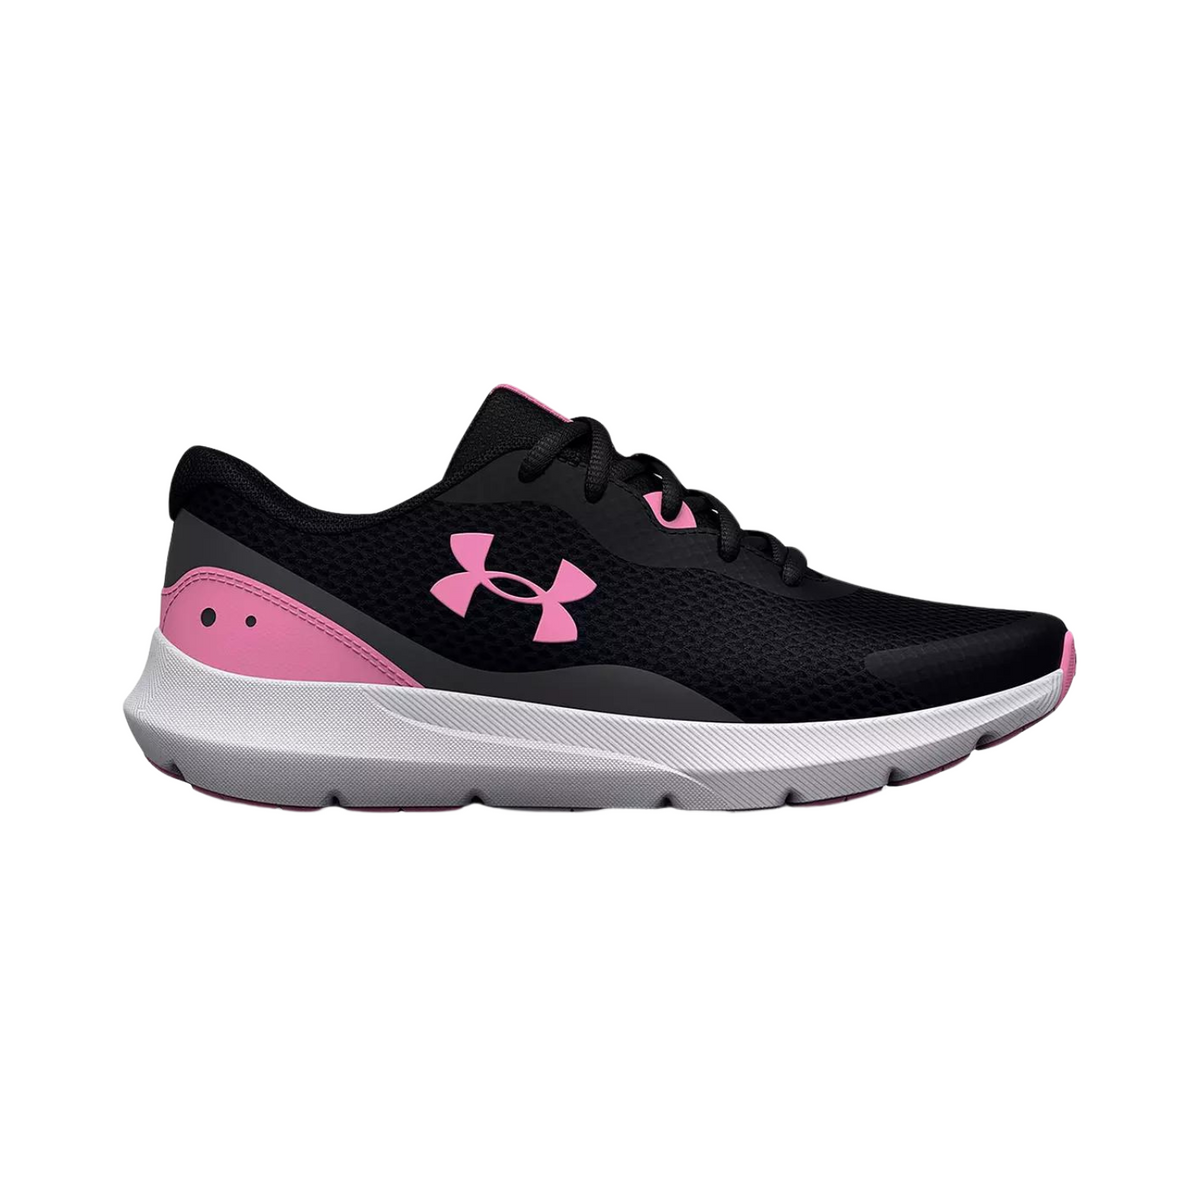 Under Armour GS Surge 3 3025013 Running Shoes Girls (Black/Flamingo)